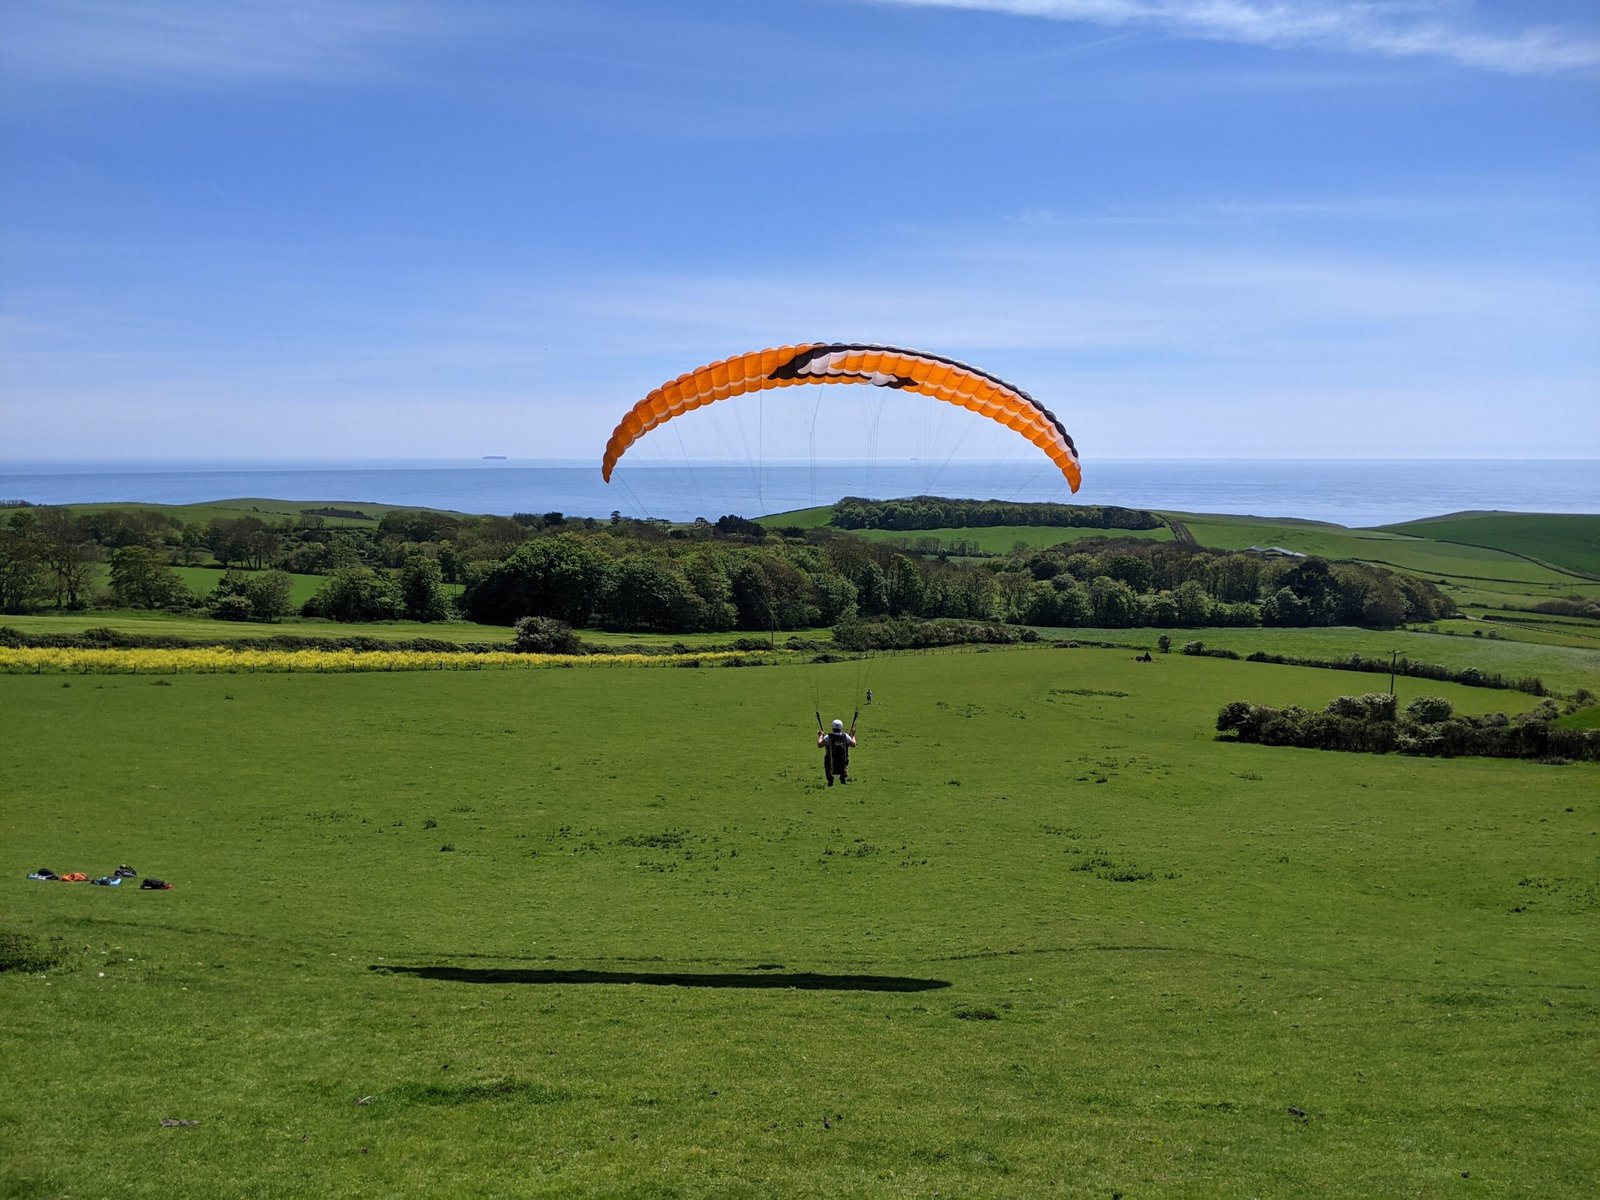 A student completing one of their first flights with Sky riders at Kimmeridge bay on their paragliding elementary pilot course